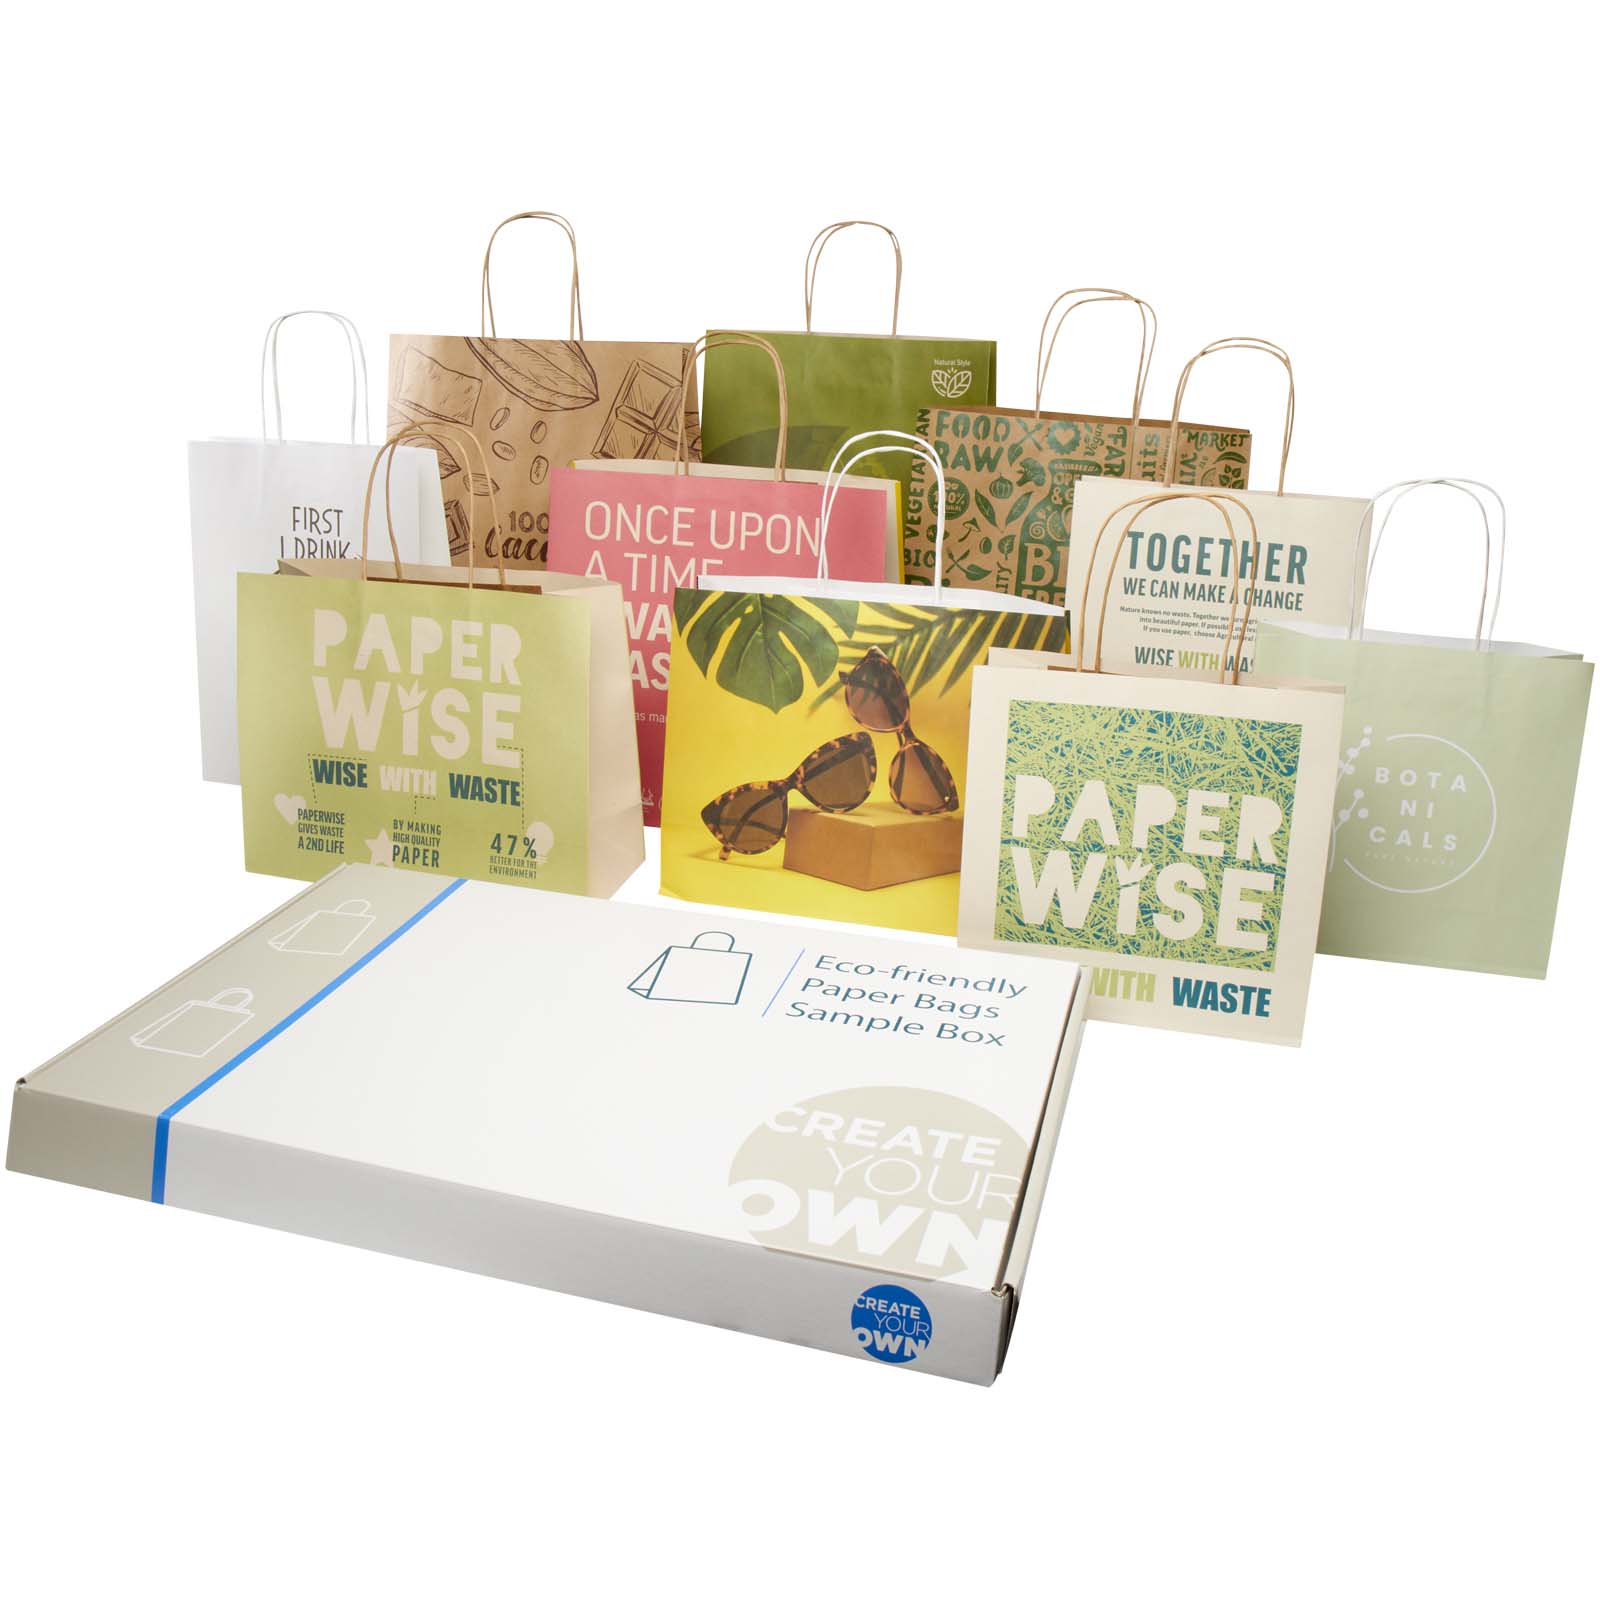 Paper Bags - Agricultural waste and kraft paper bags sample box